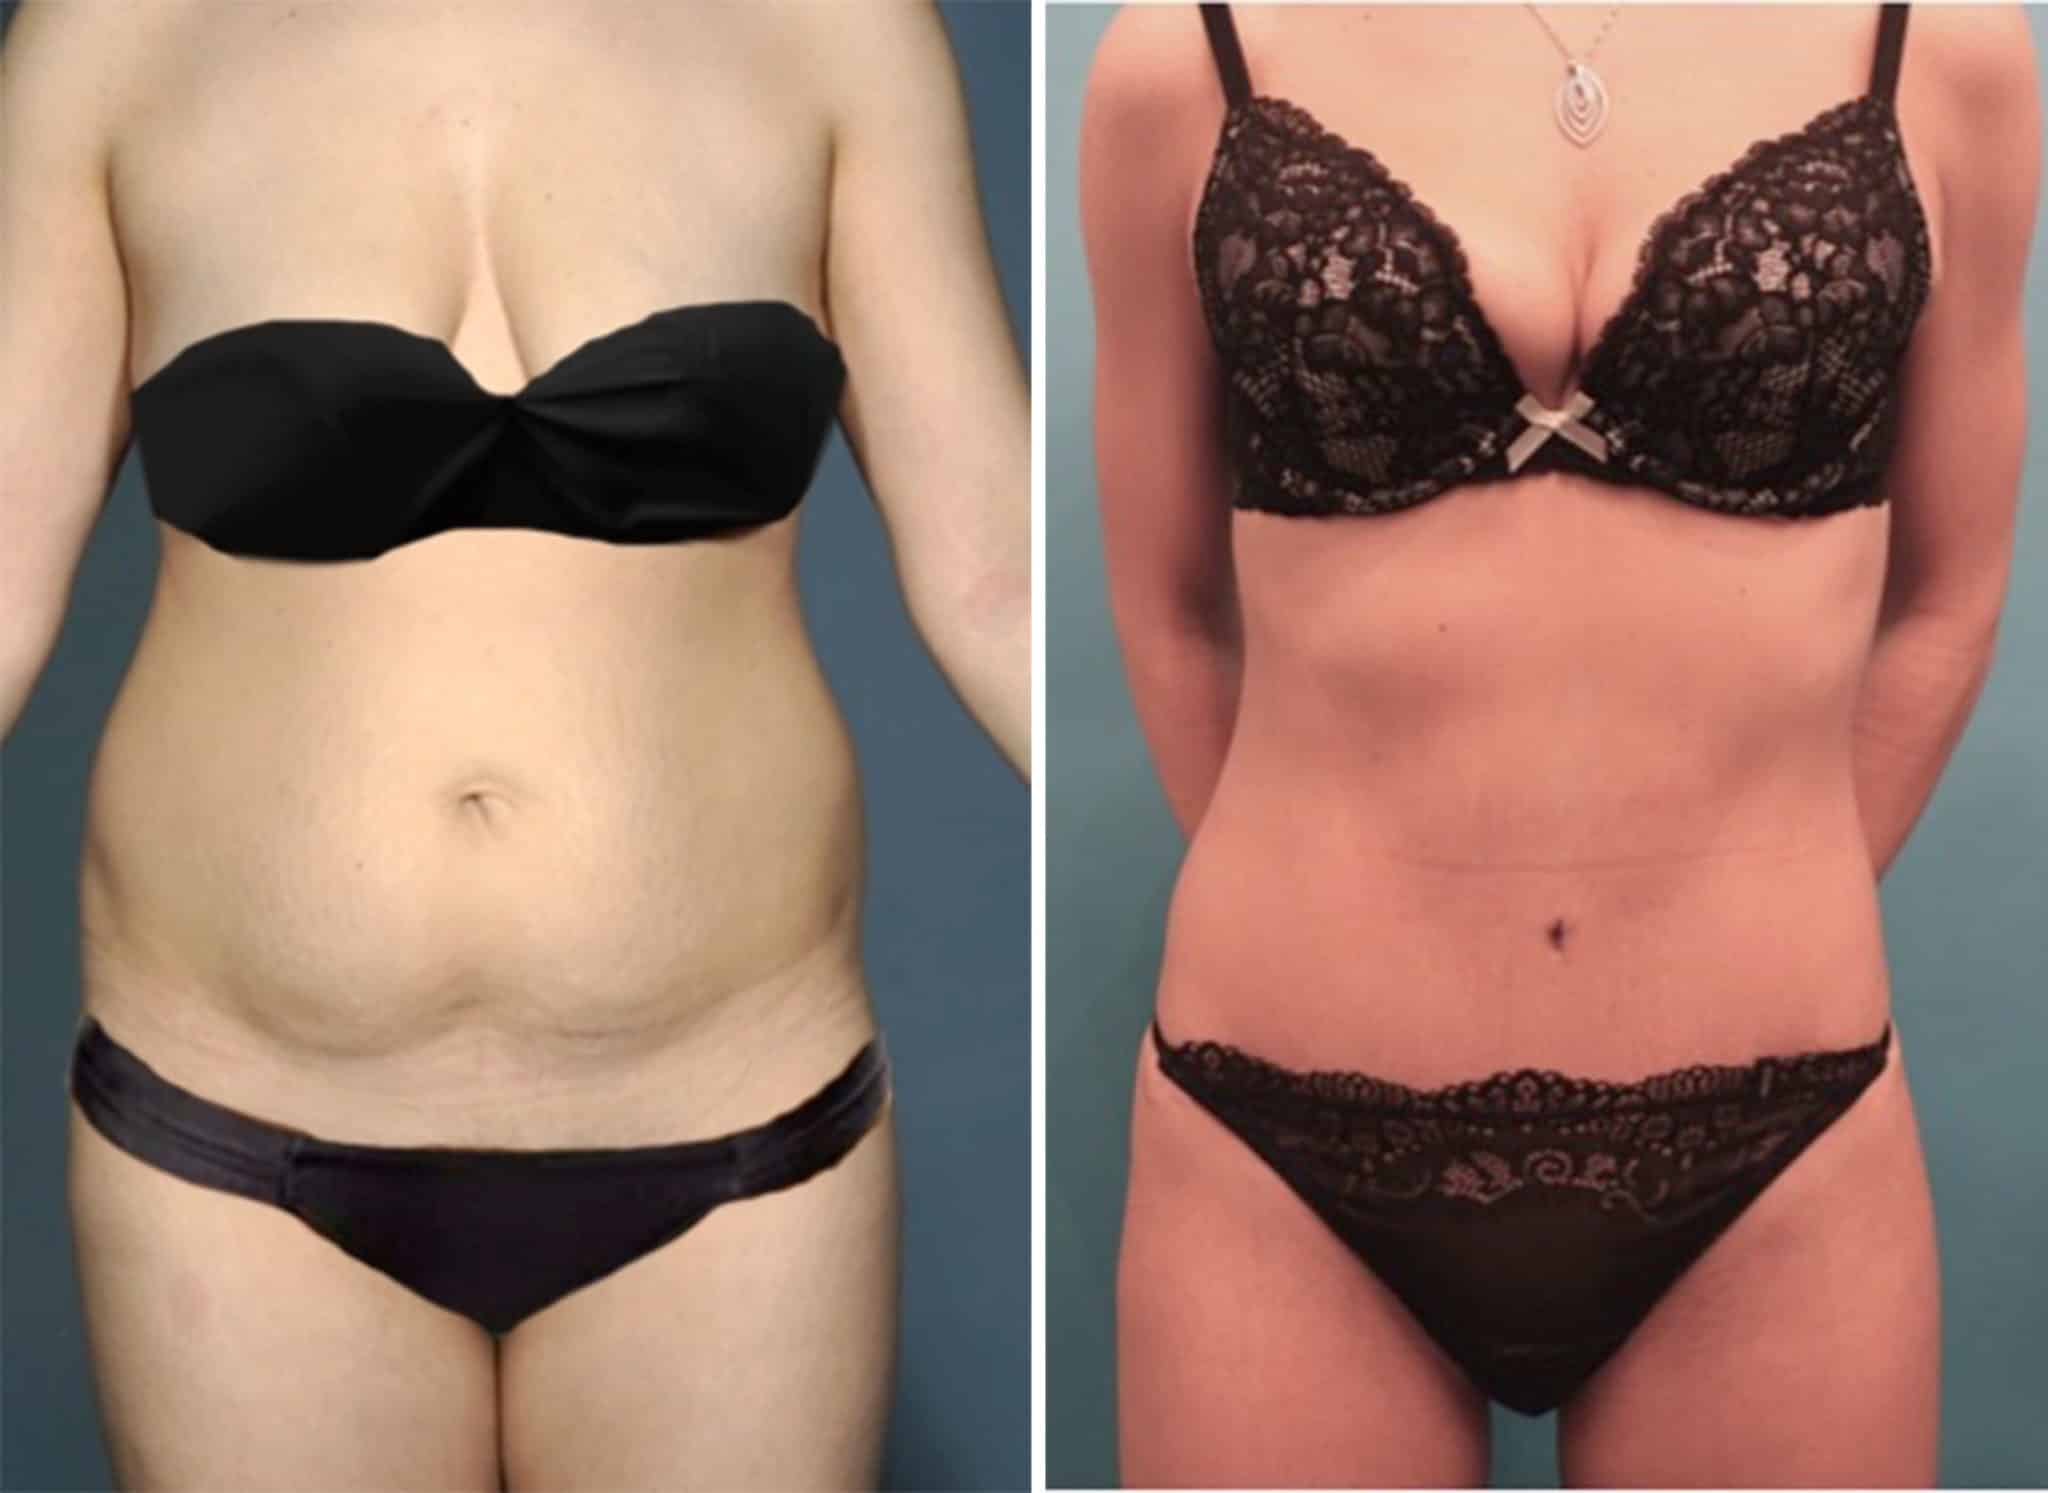 woman in black underwear before and after tummy tuck, much flatter stomach after procedure